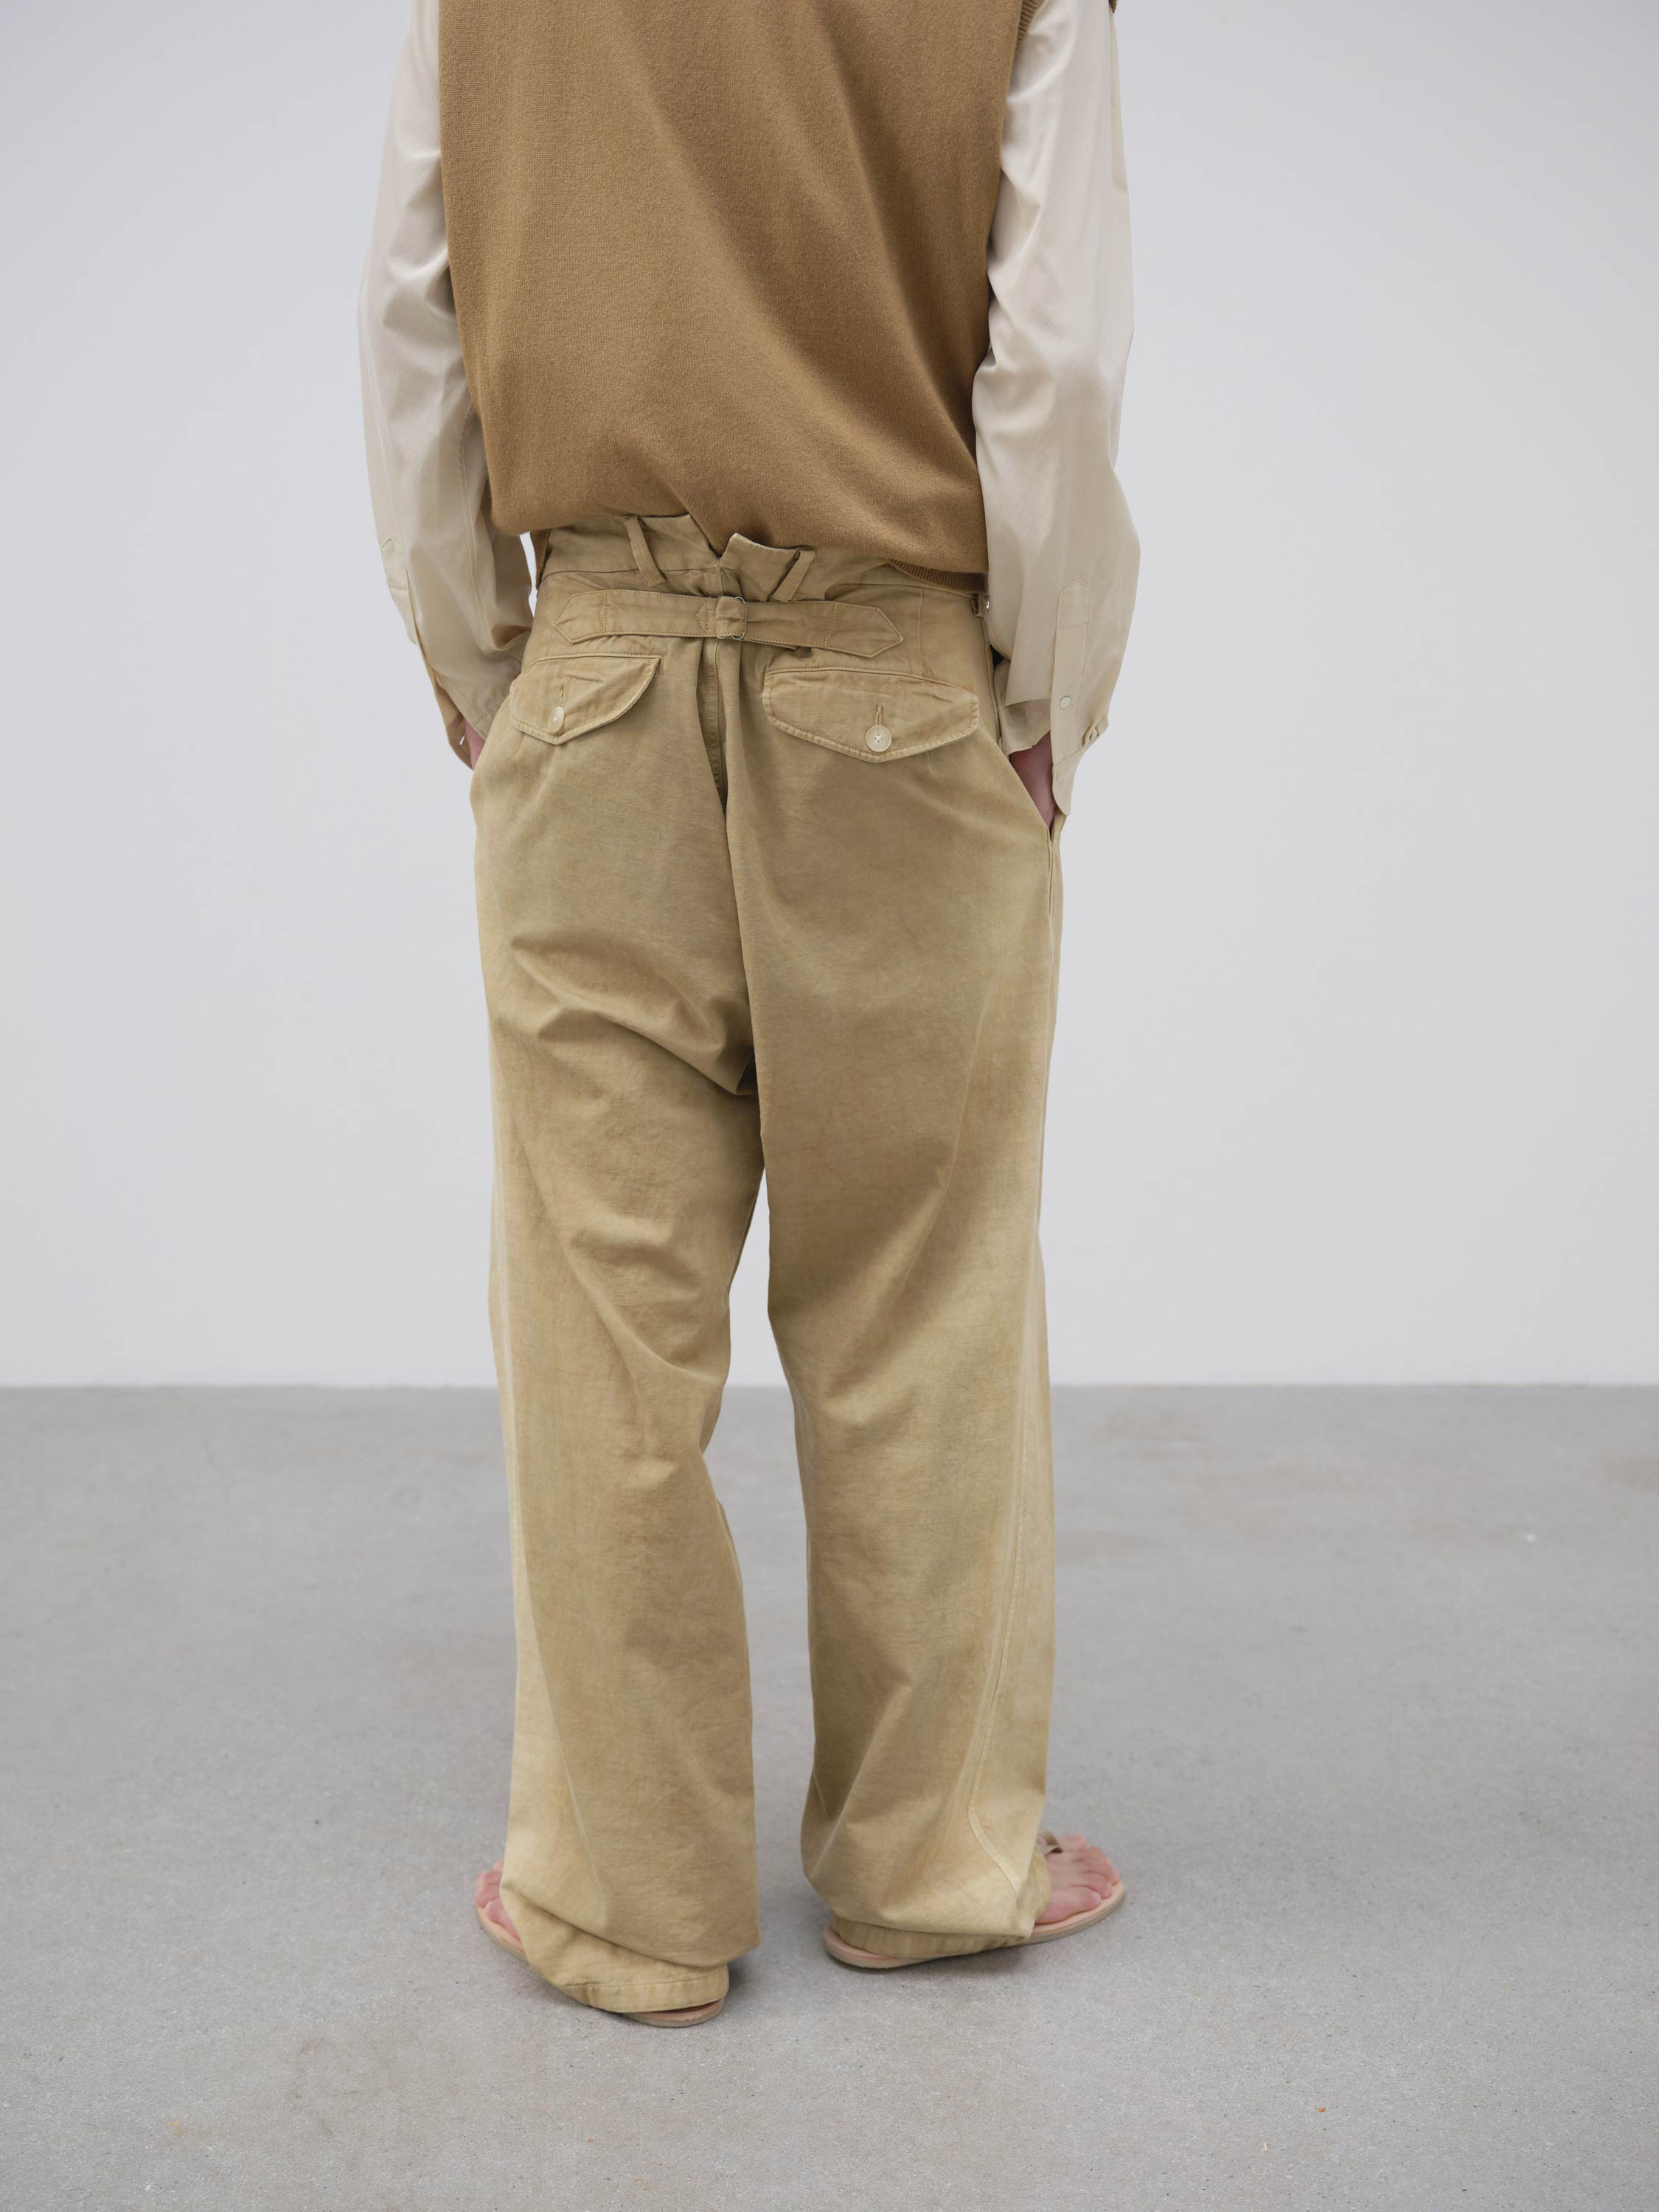 FINX NATURAL GABARDINE PRODUCT DYED PANTS 詳細画像 FADE BEIGE 2